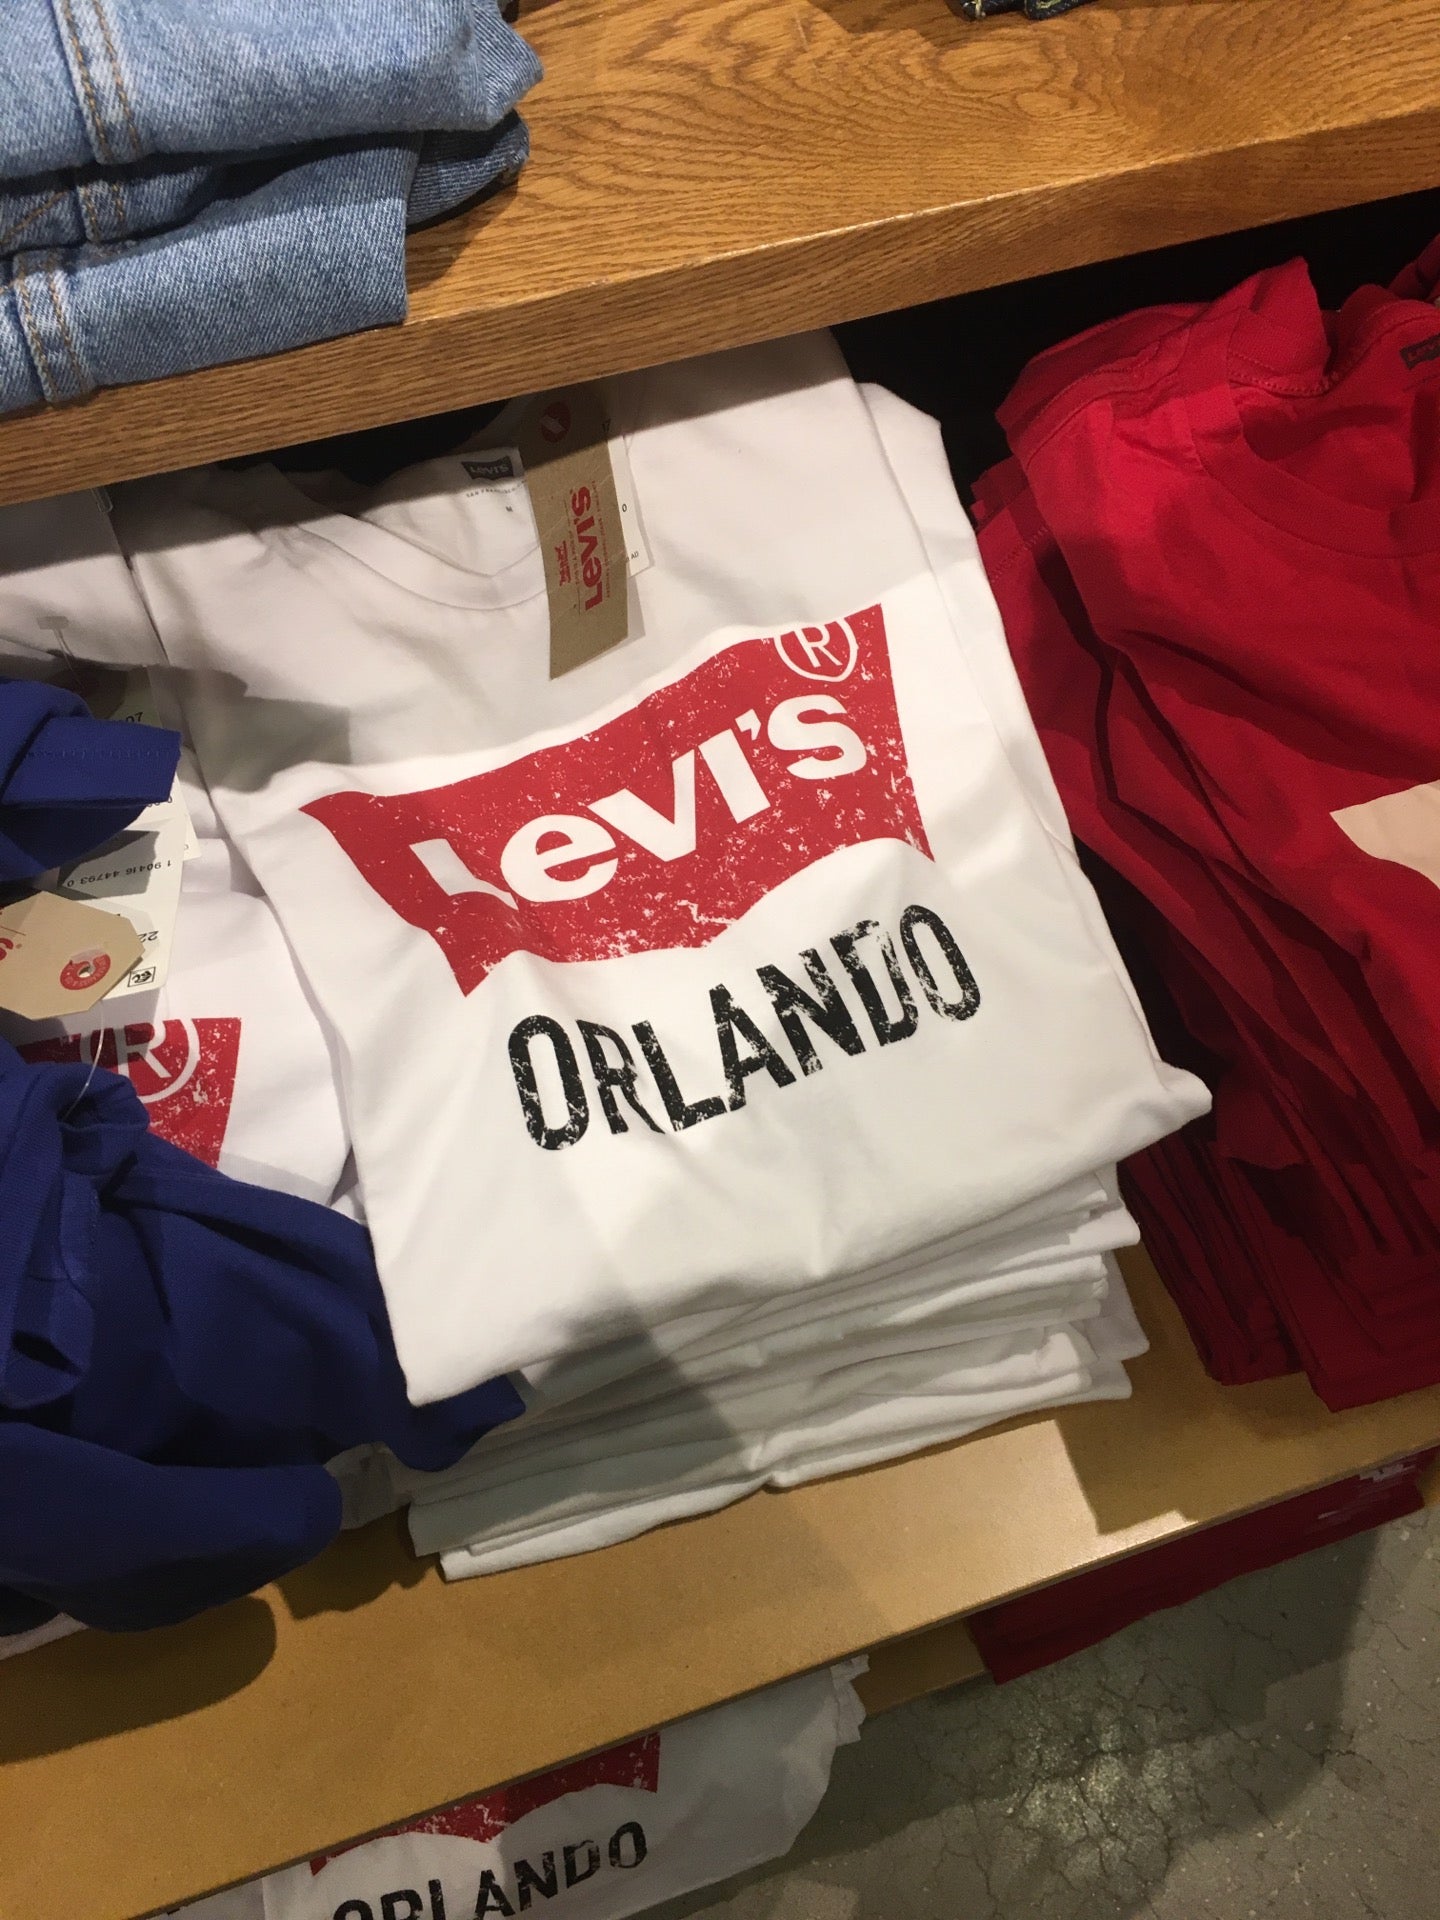 Levi's Outlet Store, 8200 Vineland Ave, Ste 1589, Orlando, FL, Clothing  Retail - MapQuest